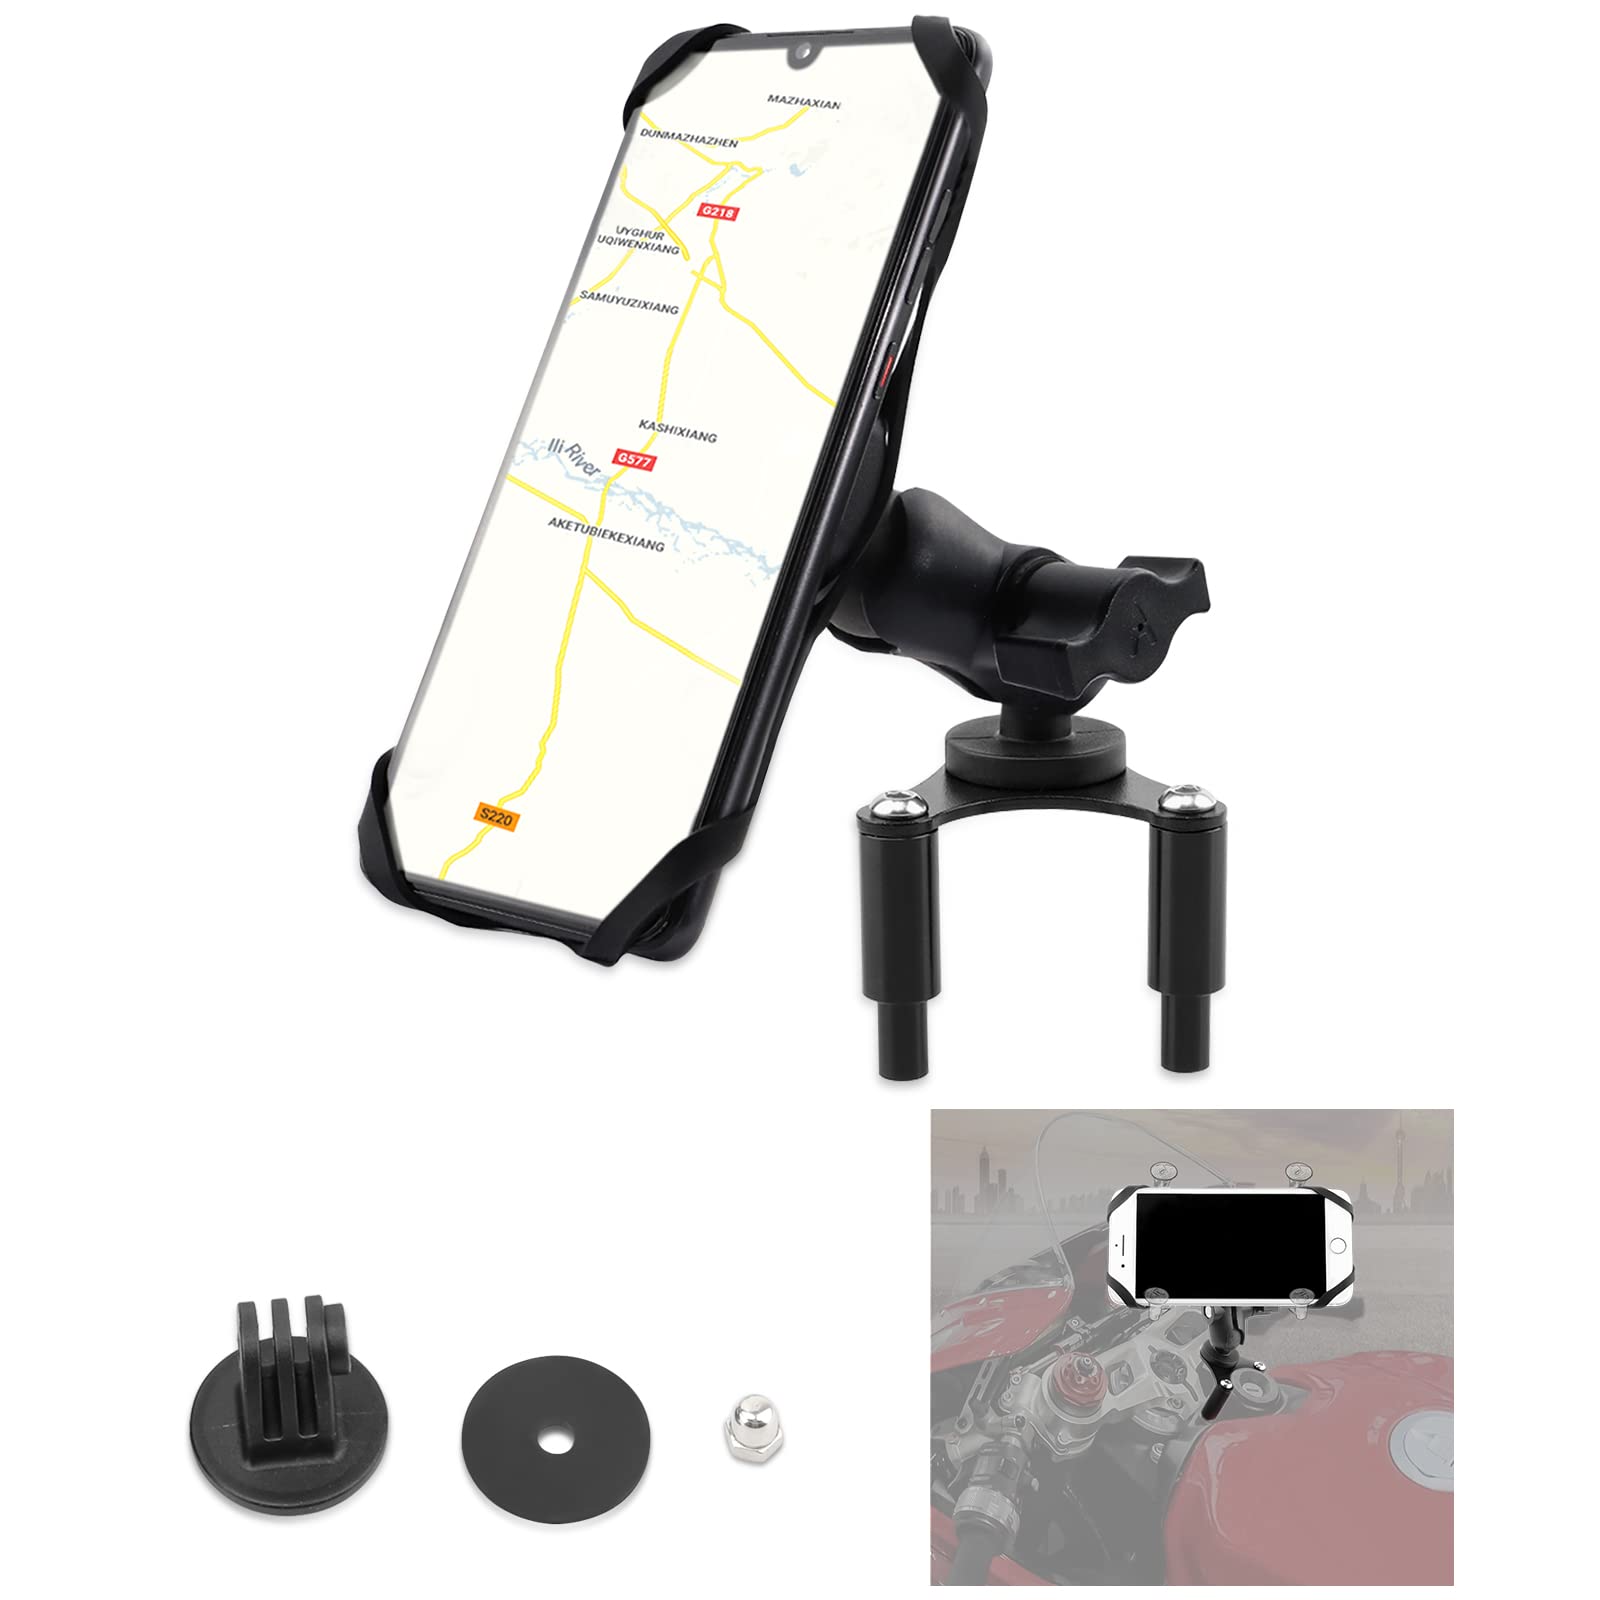 GUAIMI Motorcycle Phone Mount Cellphone Holder with Camera Rack Ignition Surround Mount for Ducati Panigale V4 2018-2020 Panigale V4S 2018-2020 Panigale 899 959 1199 1299